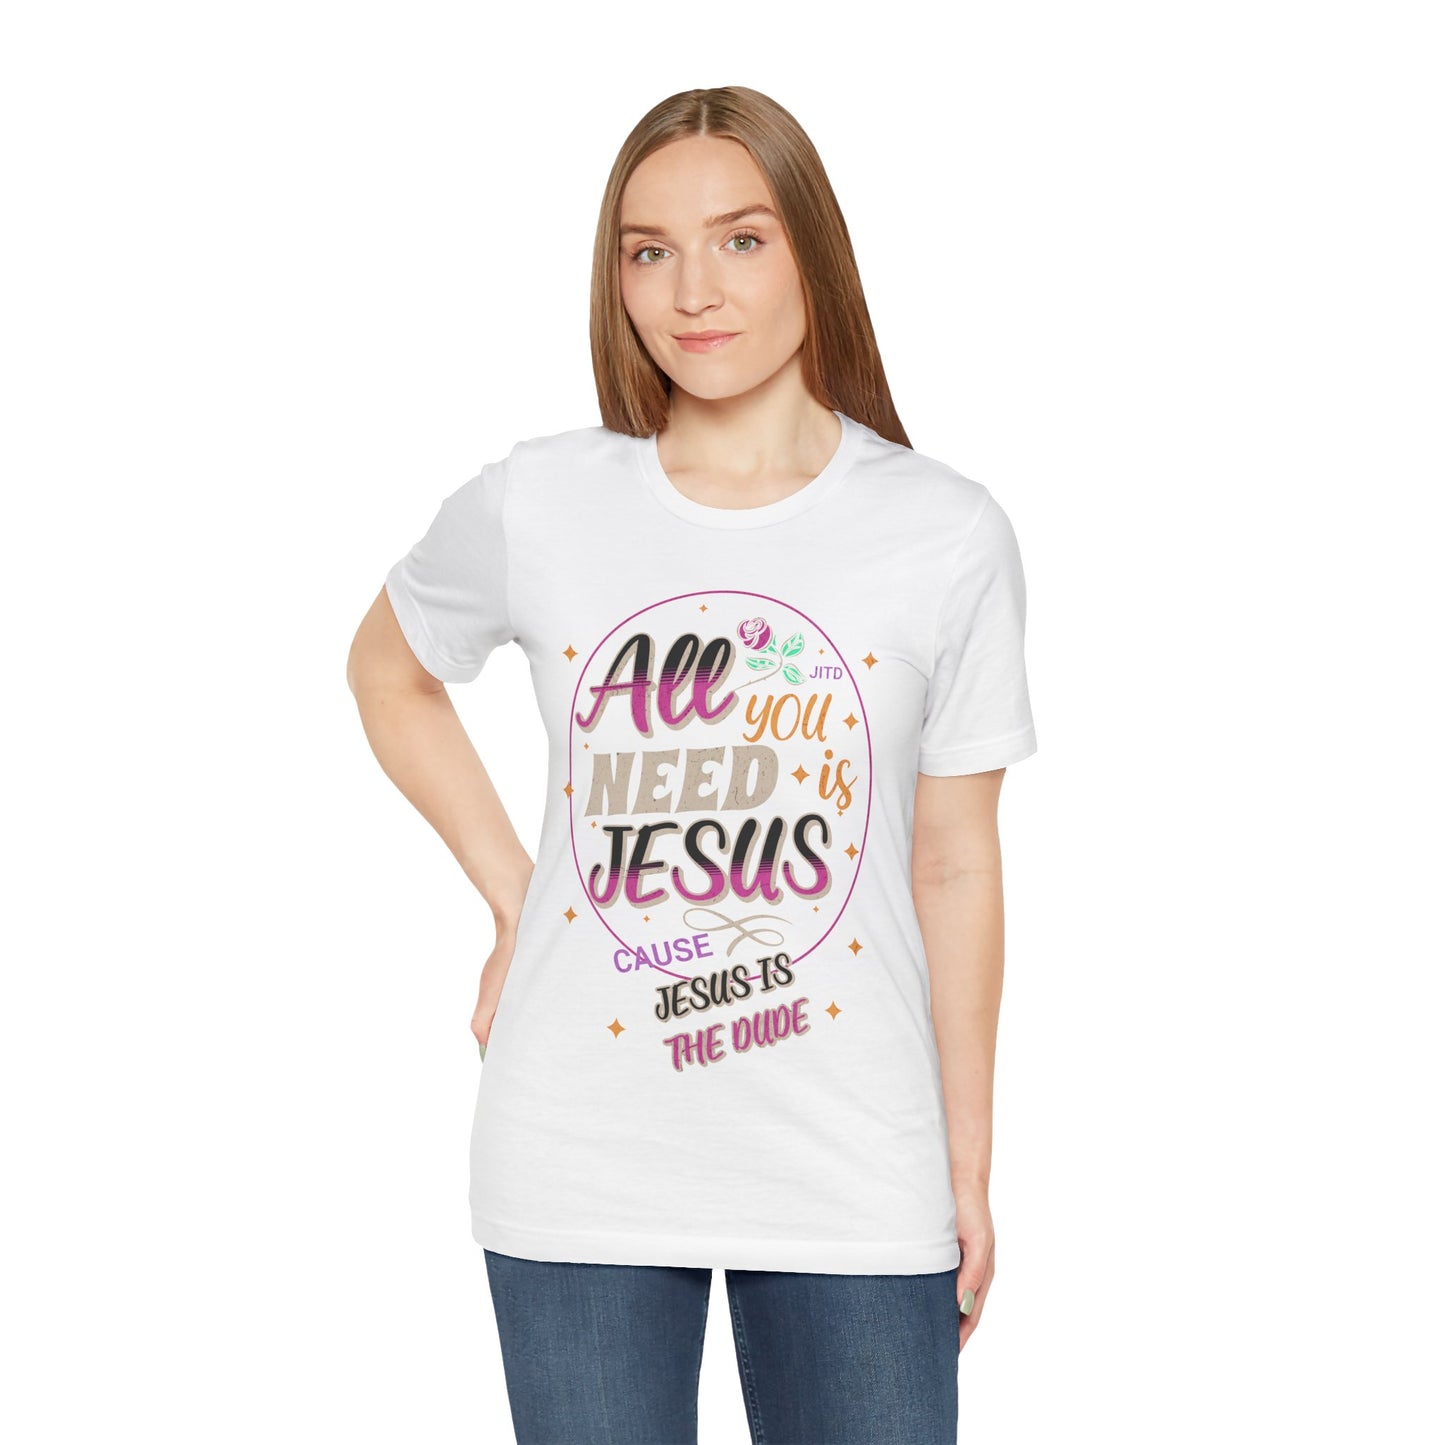 JESUS IS THE DUDE "ALL YOU NEED" TEE